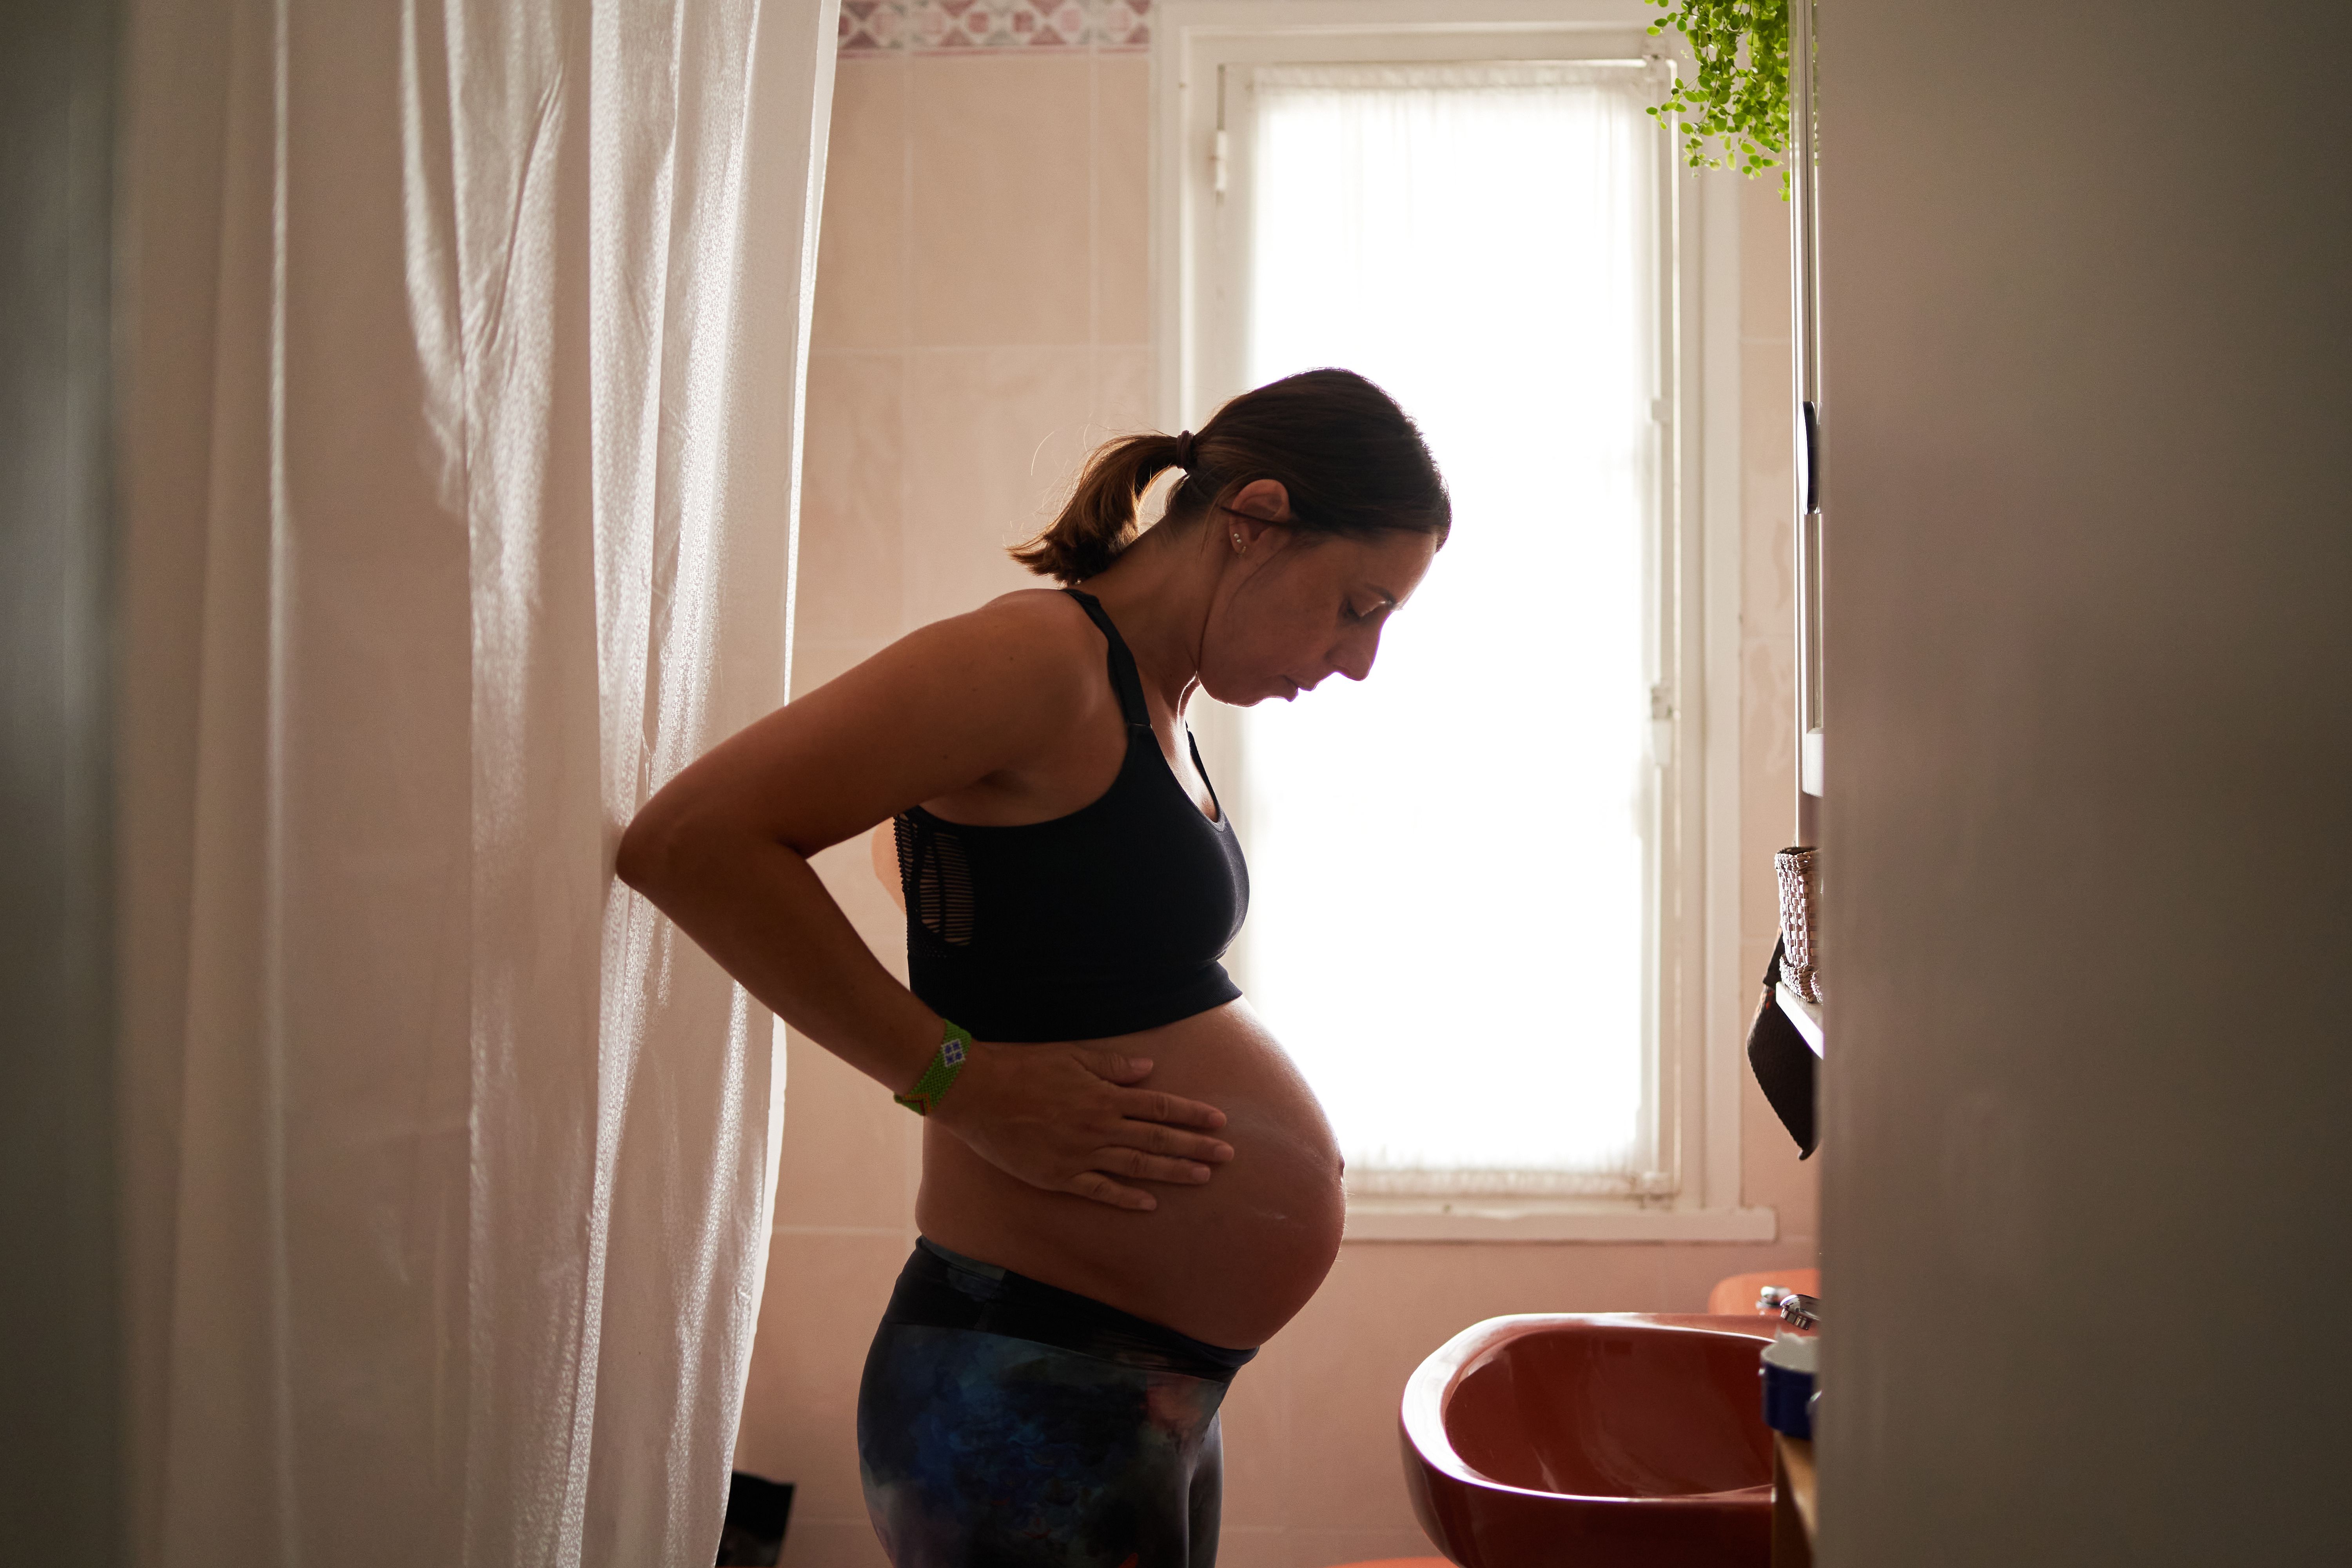 A pregnant woman in a bathroom. | Source: Getty Images